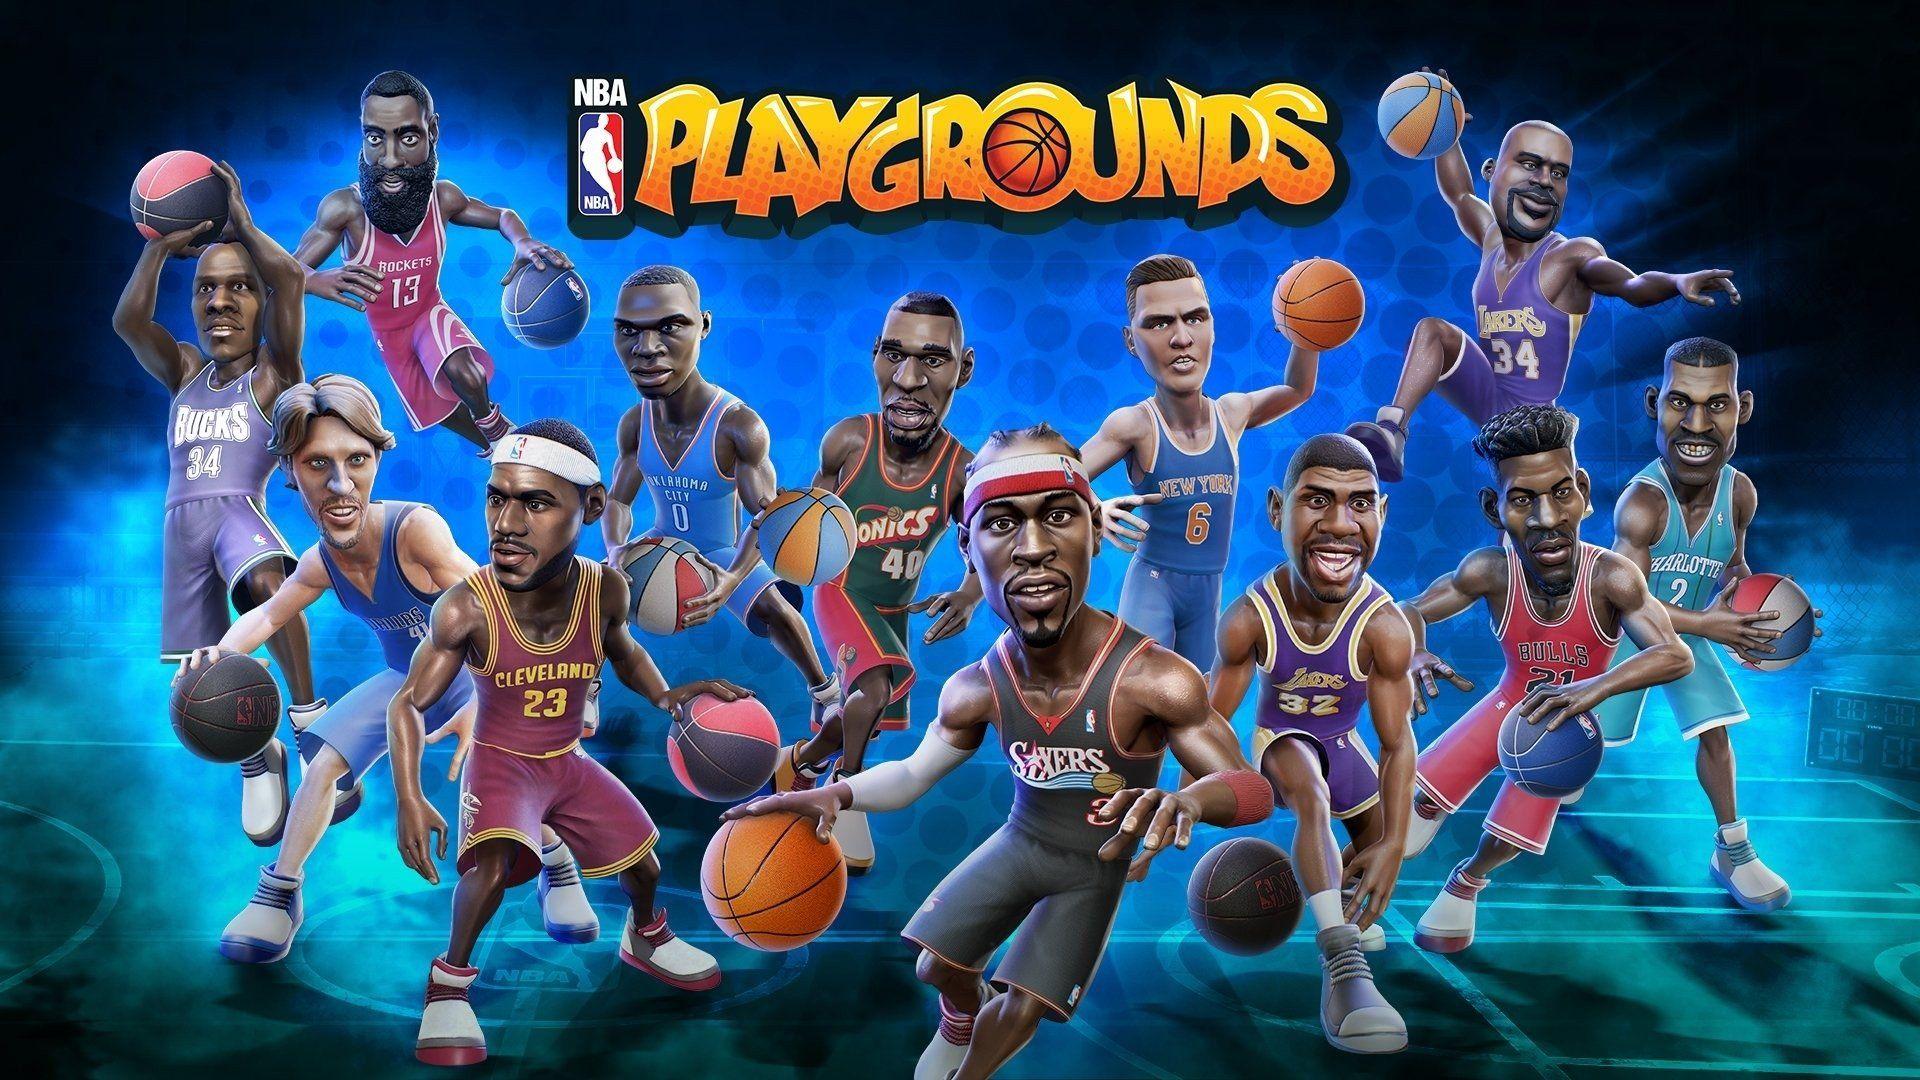 NBA Playgrounds HD Wallpaper and Background Image